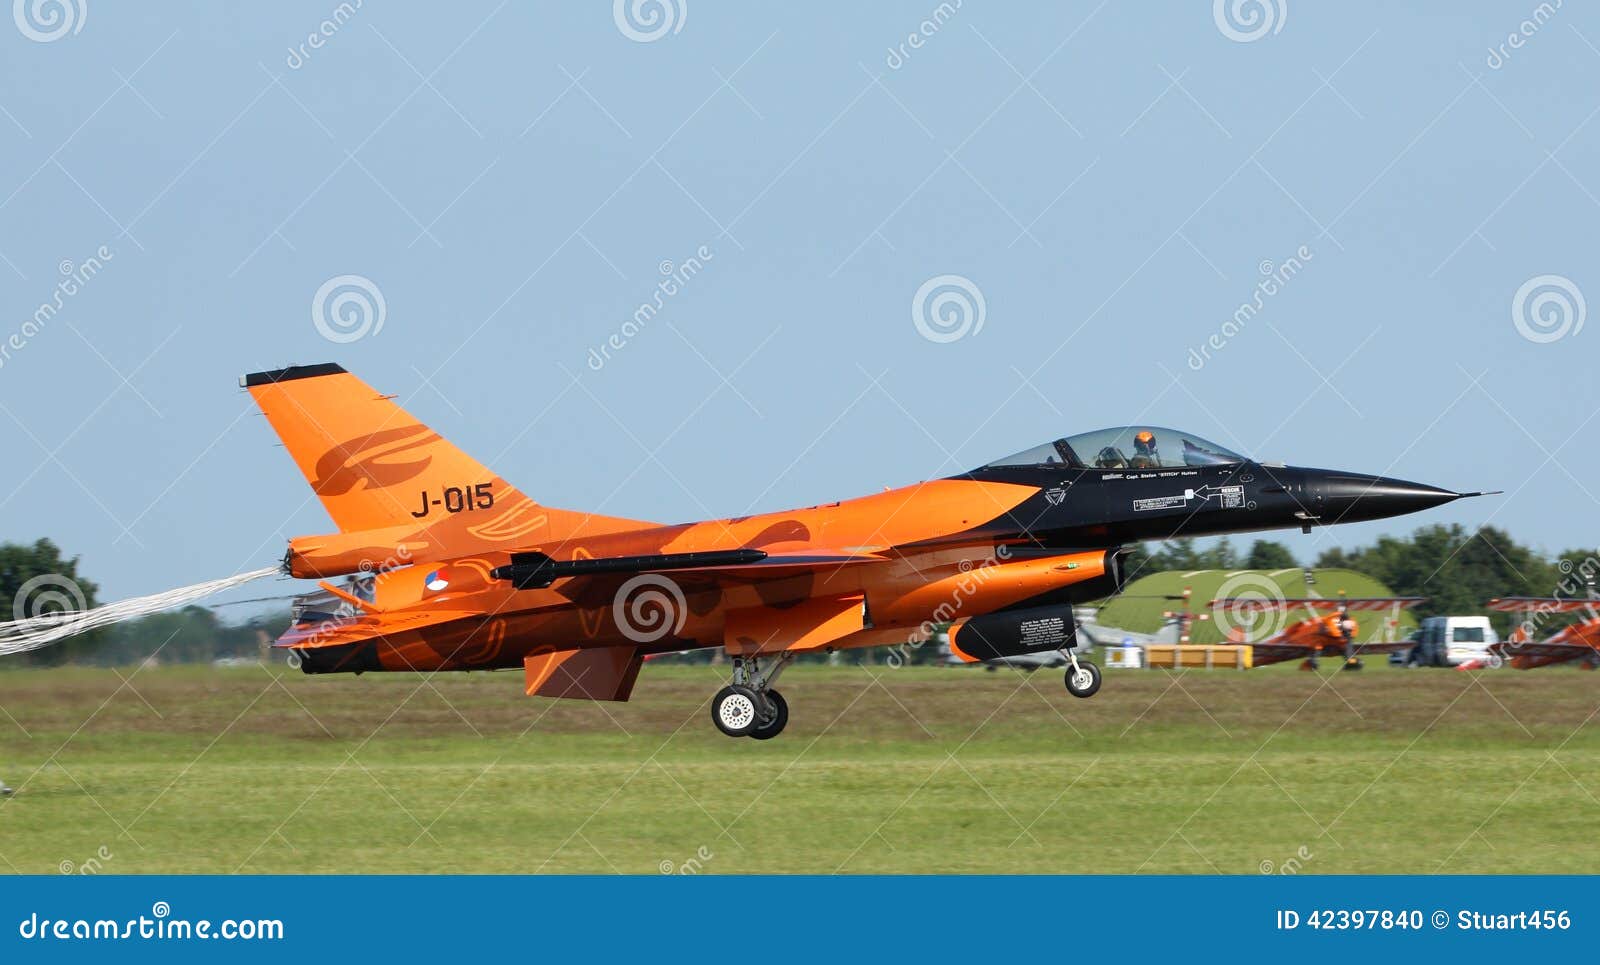 [ITALERI] 1/72 - General-Dynamics F-16A Fighting Falcon  belge F-falcon-brightly-coloured-orange-fighting-royal-netherlands-air-force-deploys-parachute-as-lands-42397840